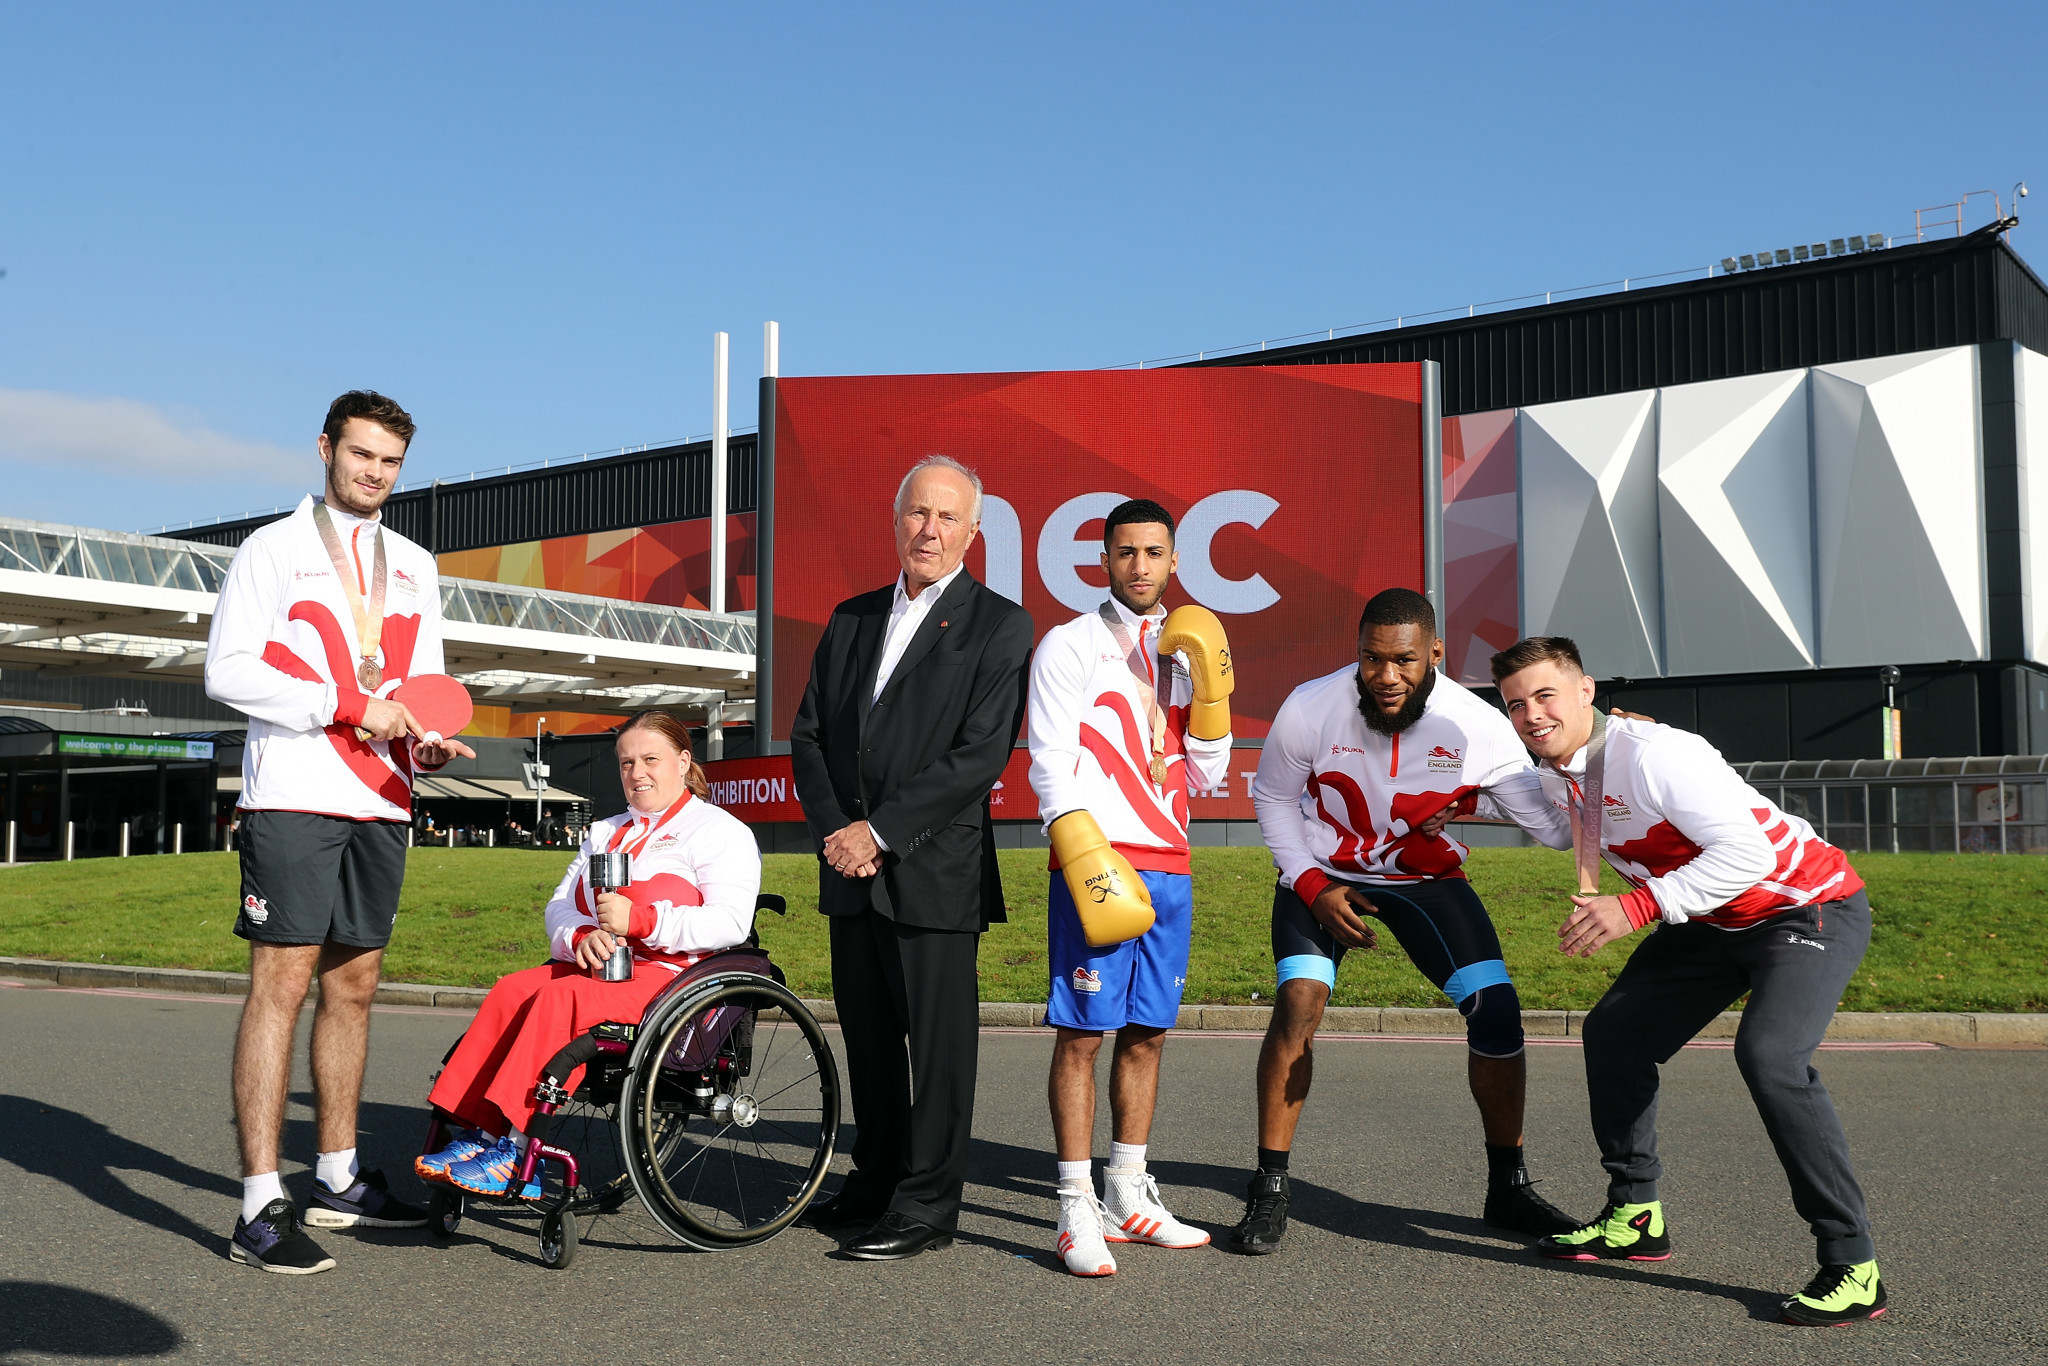 The National Exhibition Centre, which hosted five sports and two Para sports during the Commonwealth Games, has got back on track financially following Birmingham 2022, it is claimed ©Getty Images